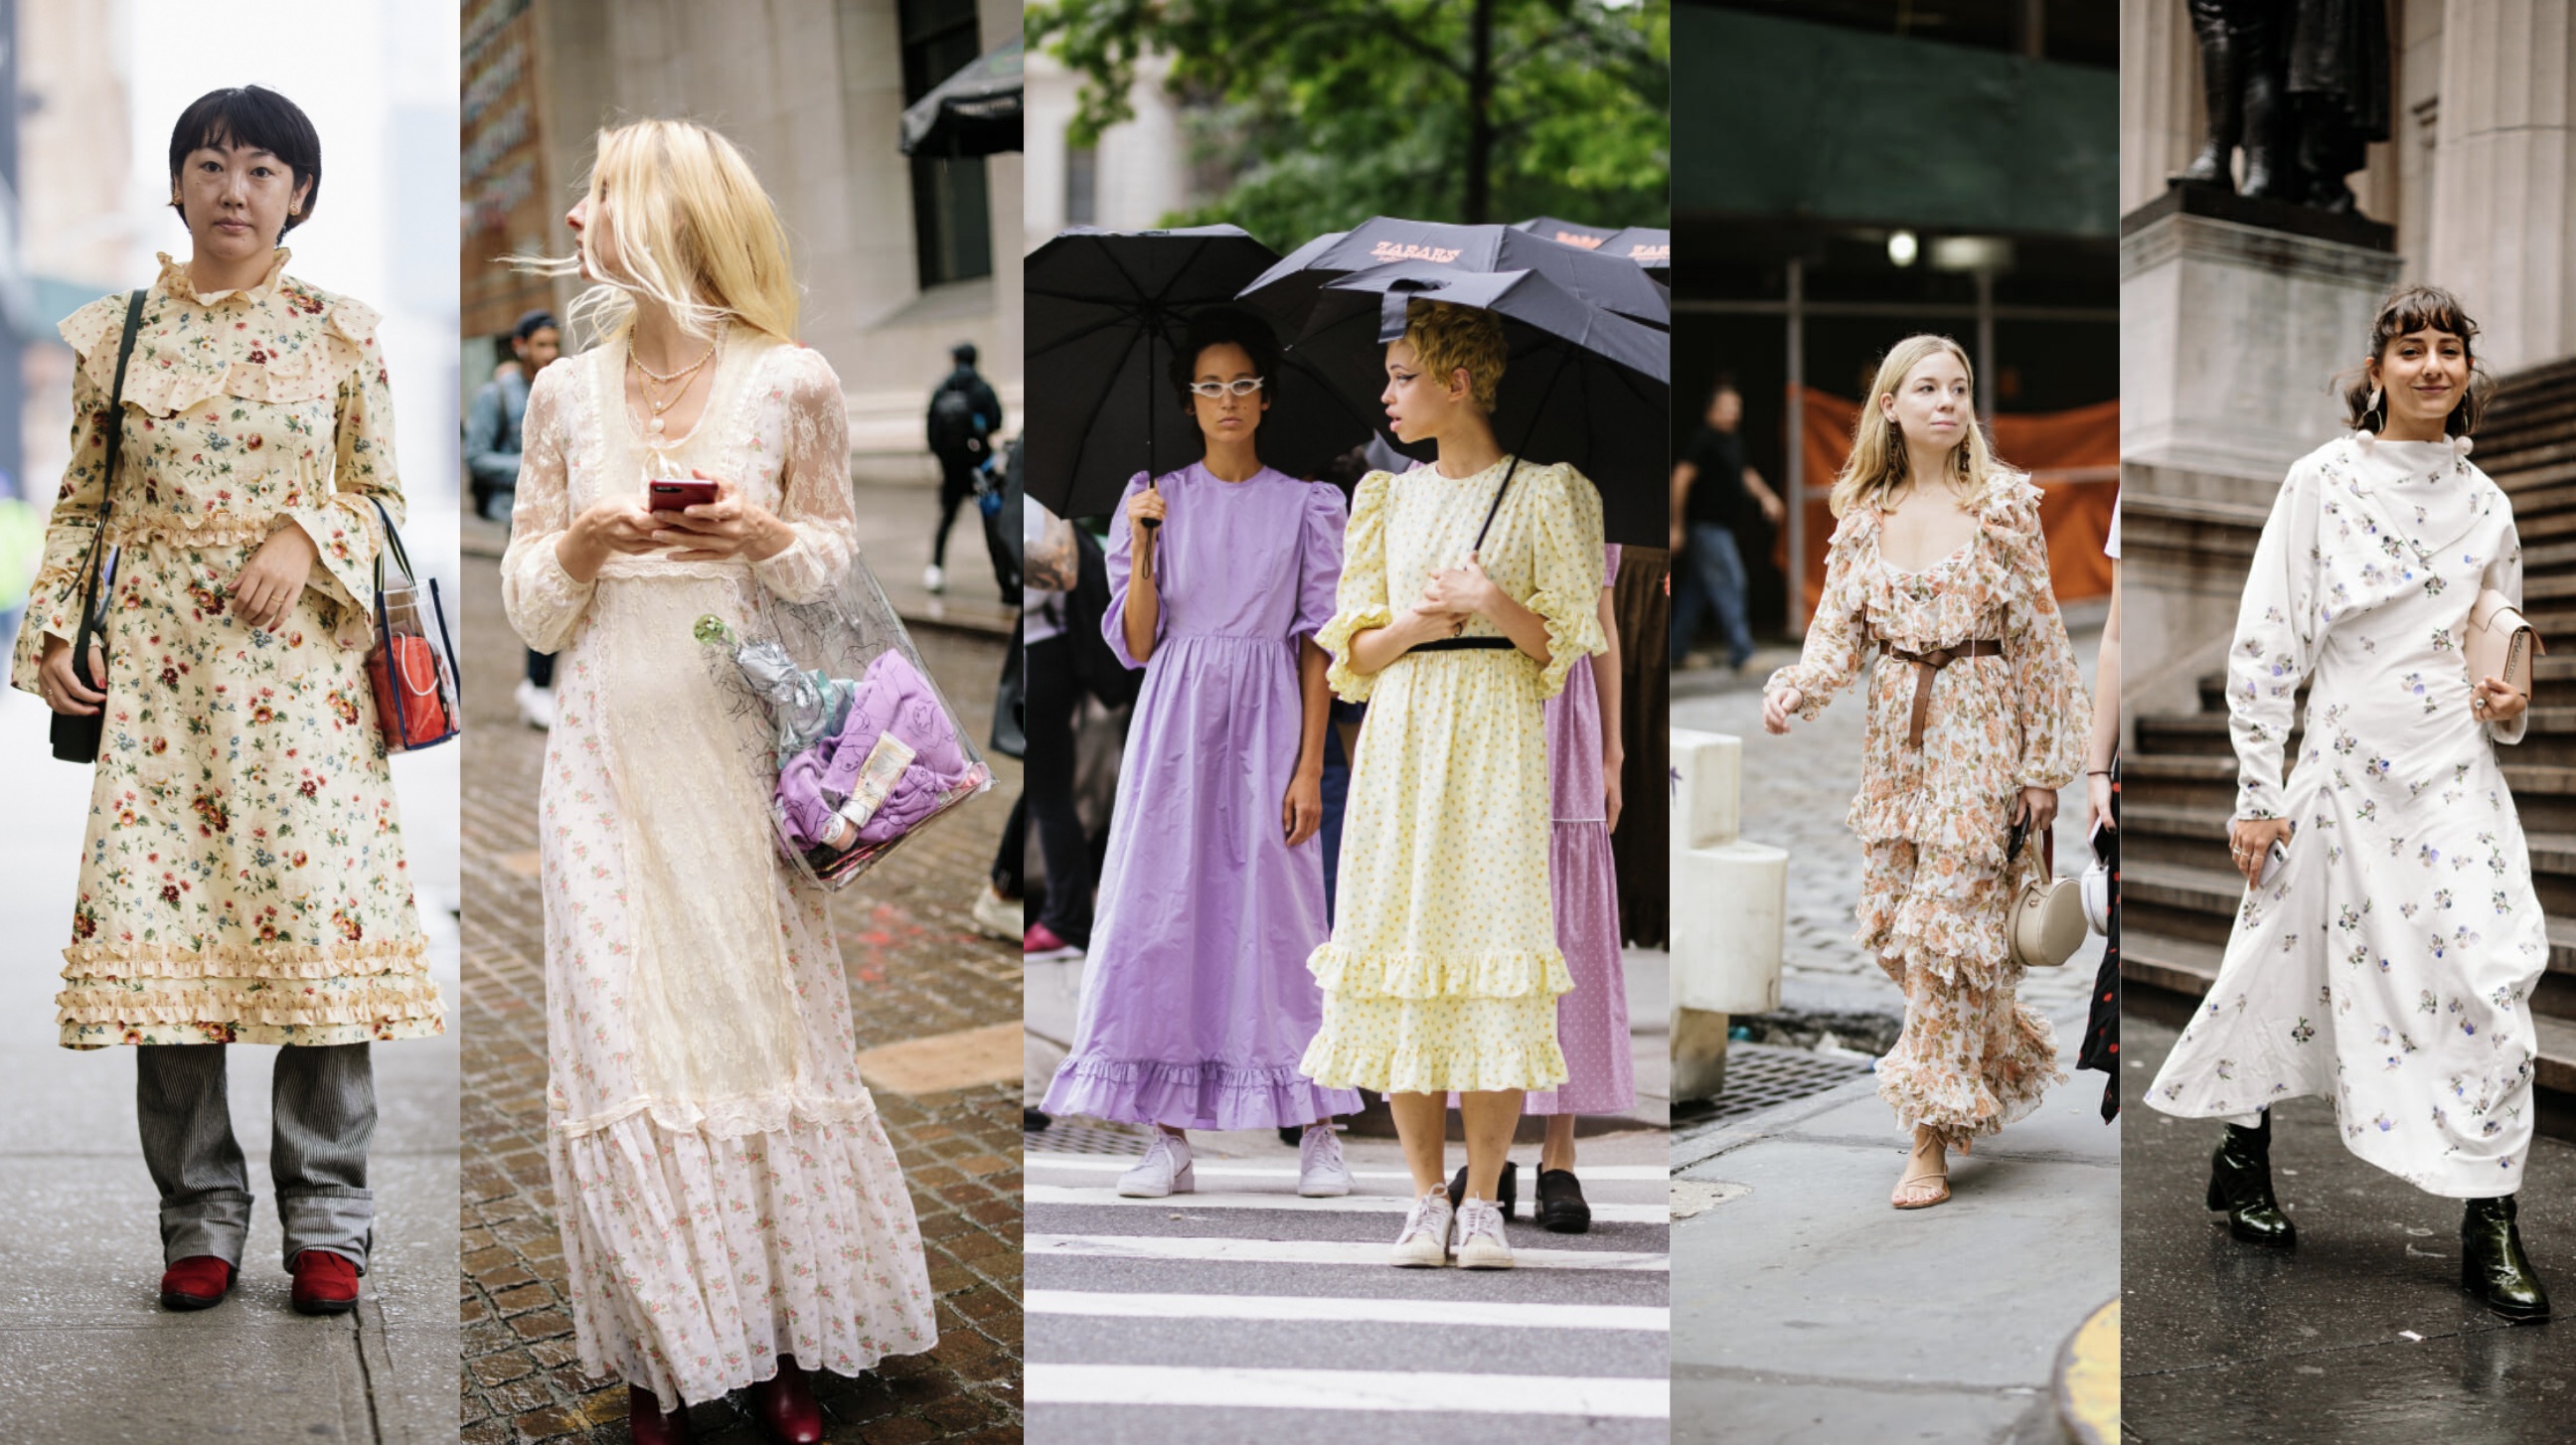 The Grey Edit-NYFW Street Style Looks by Trend-Prarie Dresses